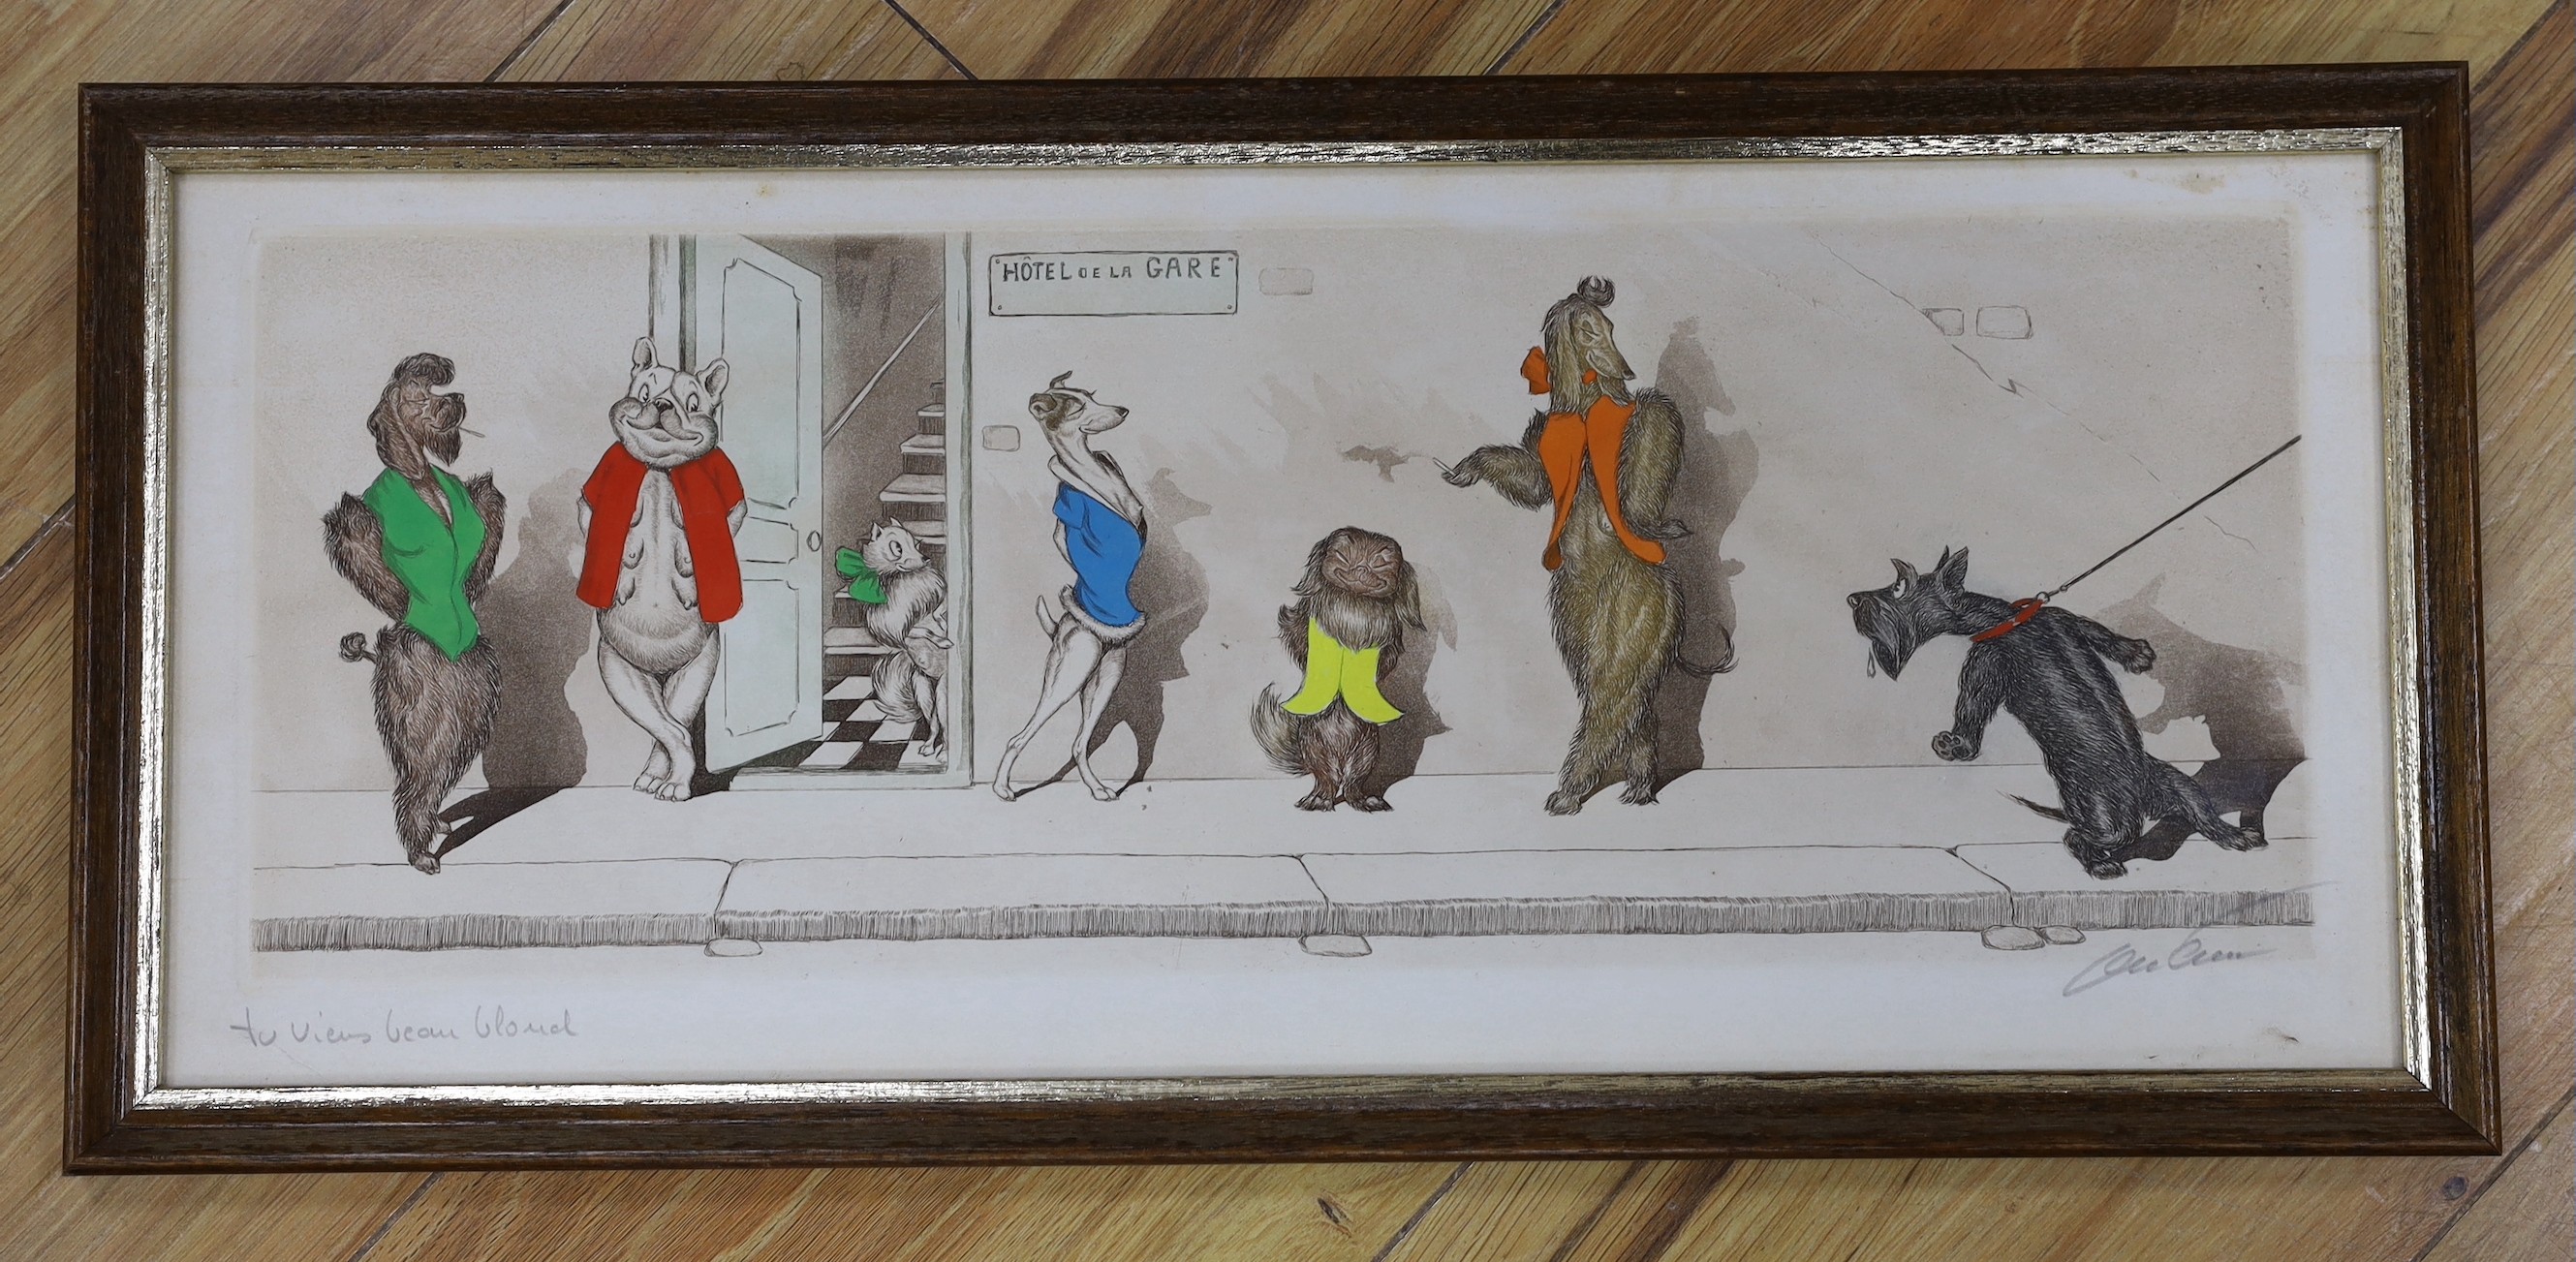 Boris O'Klein (French, 1893-1985), coloured etching, 'Tu Viens Beaux Blond', signed in pencil, 20 x 47cm